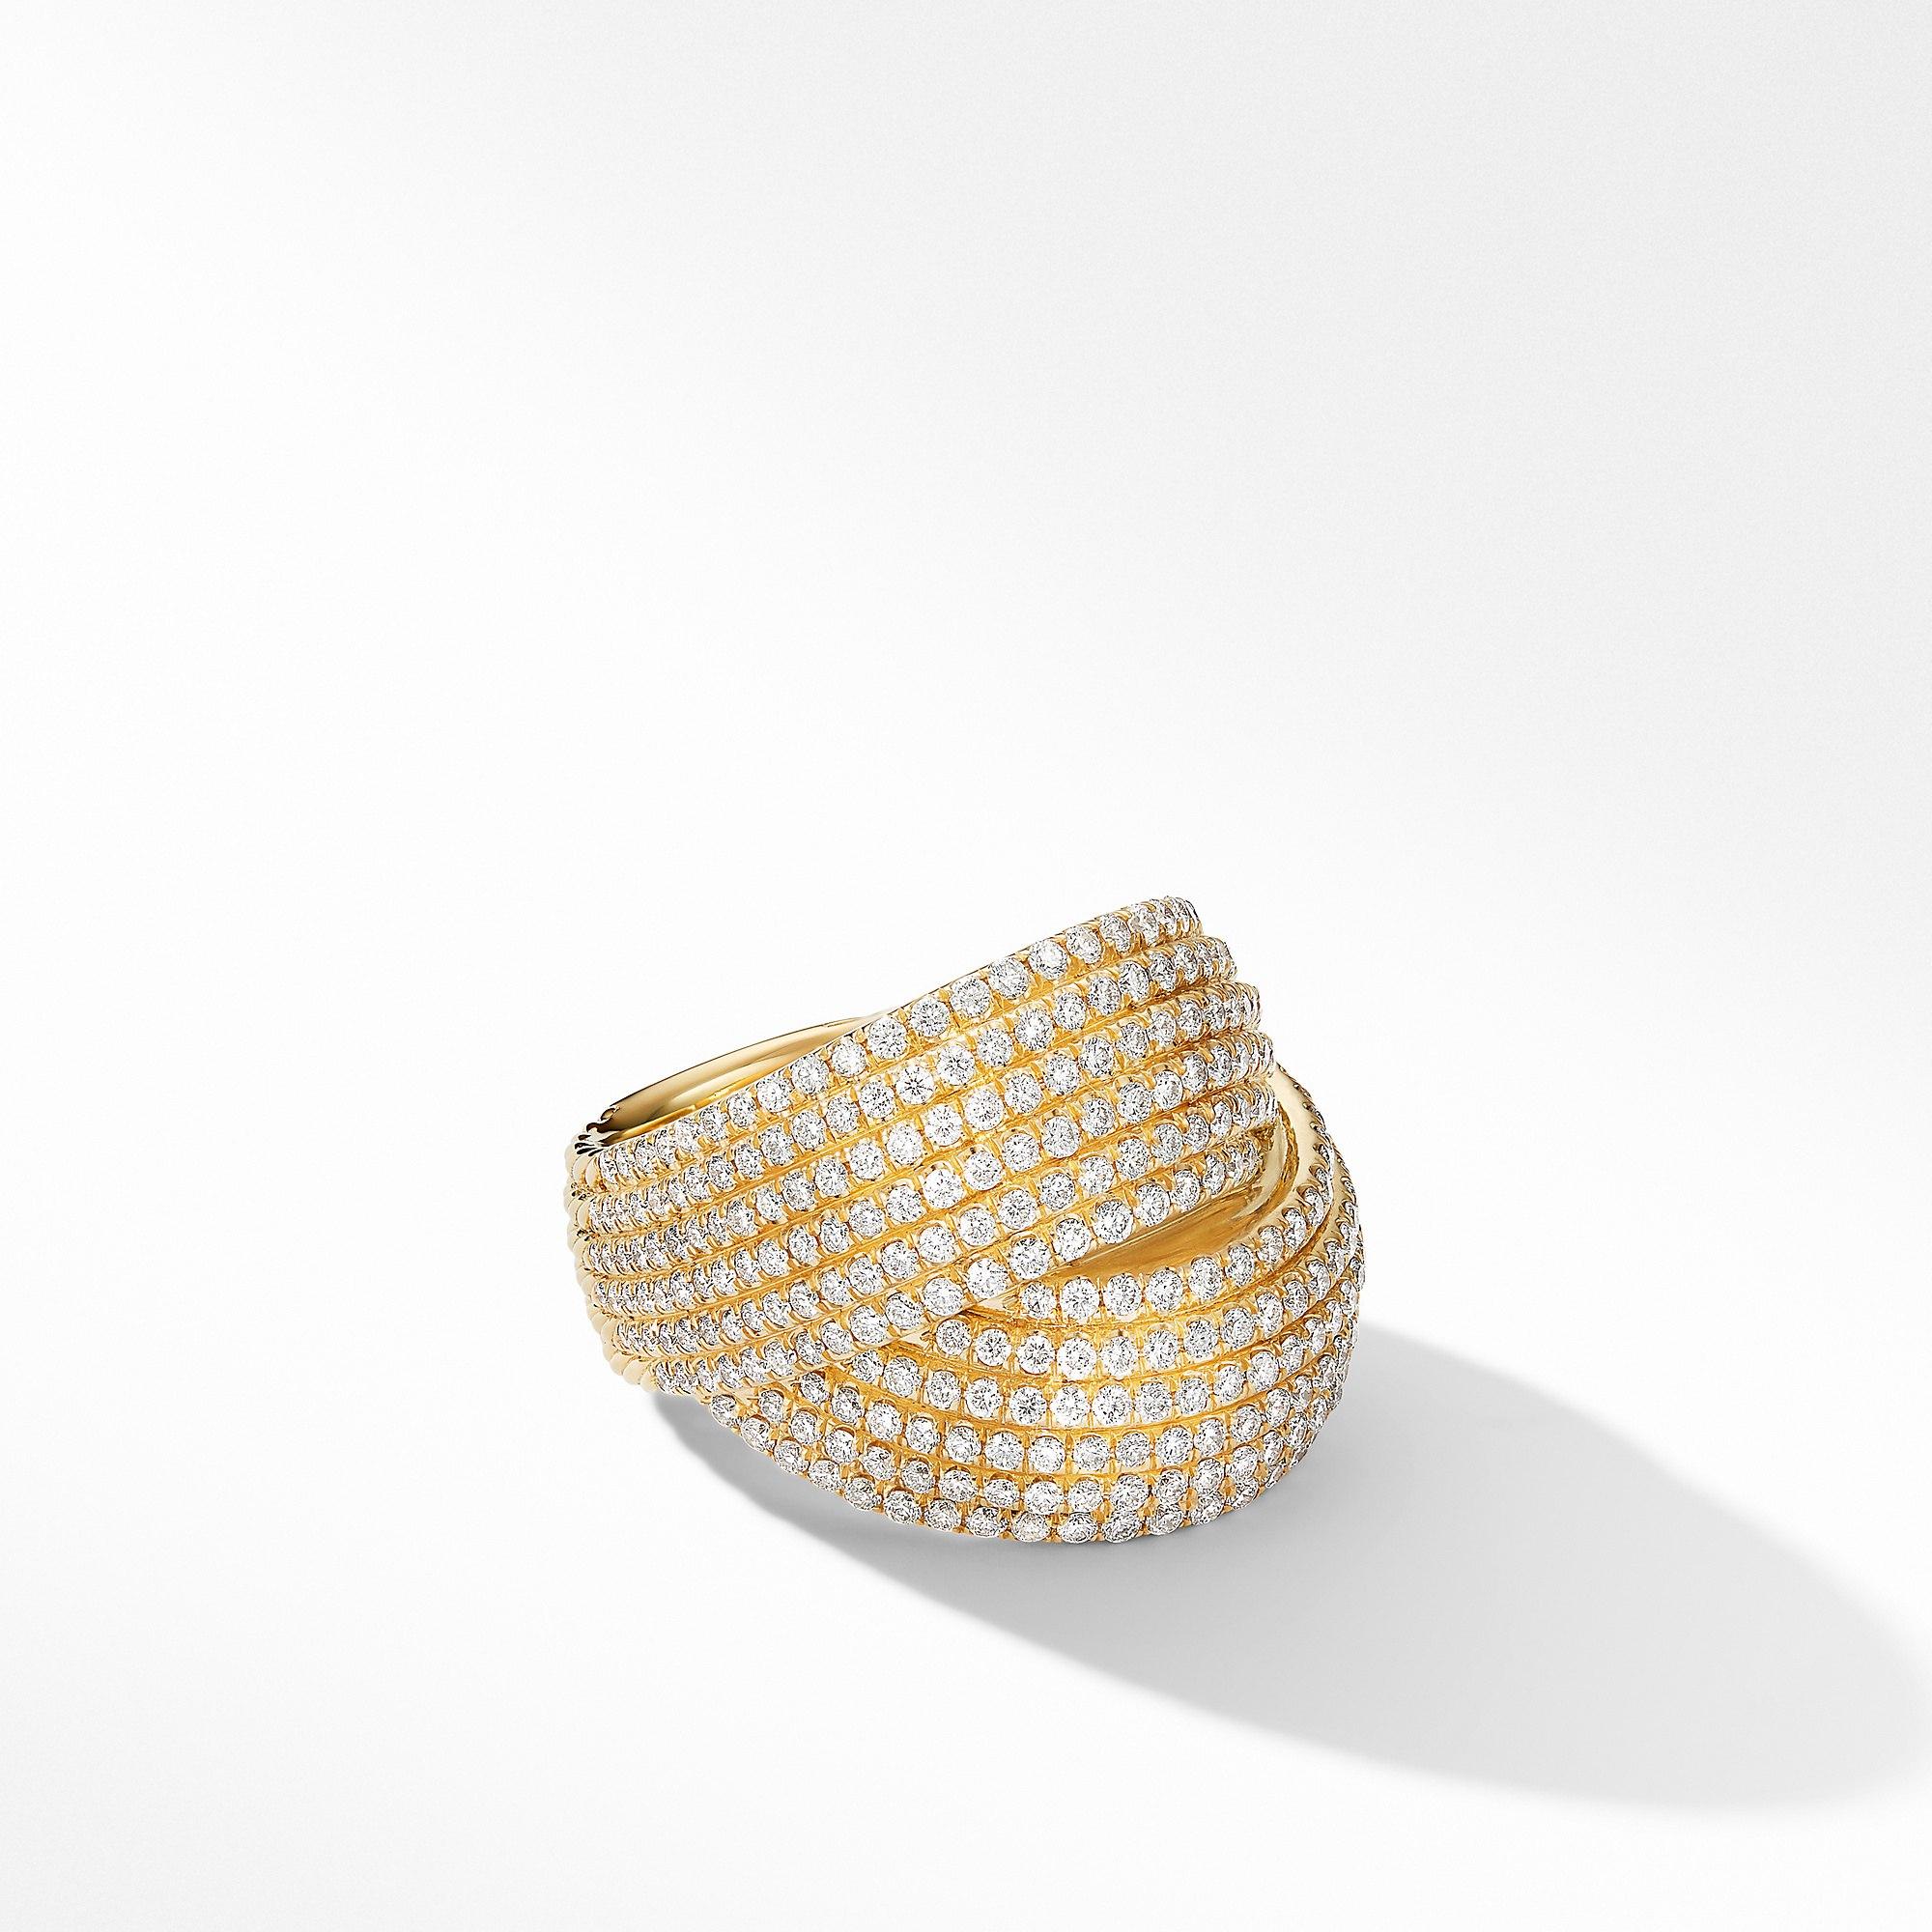 David Yurman DY Origami Crossover Ring in 18k Yellow Gold with Diamonds